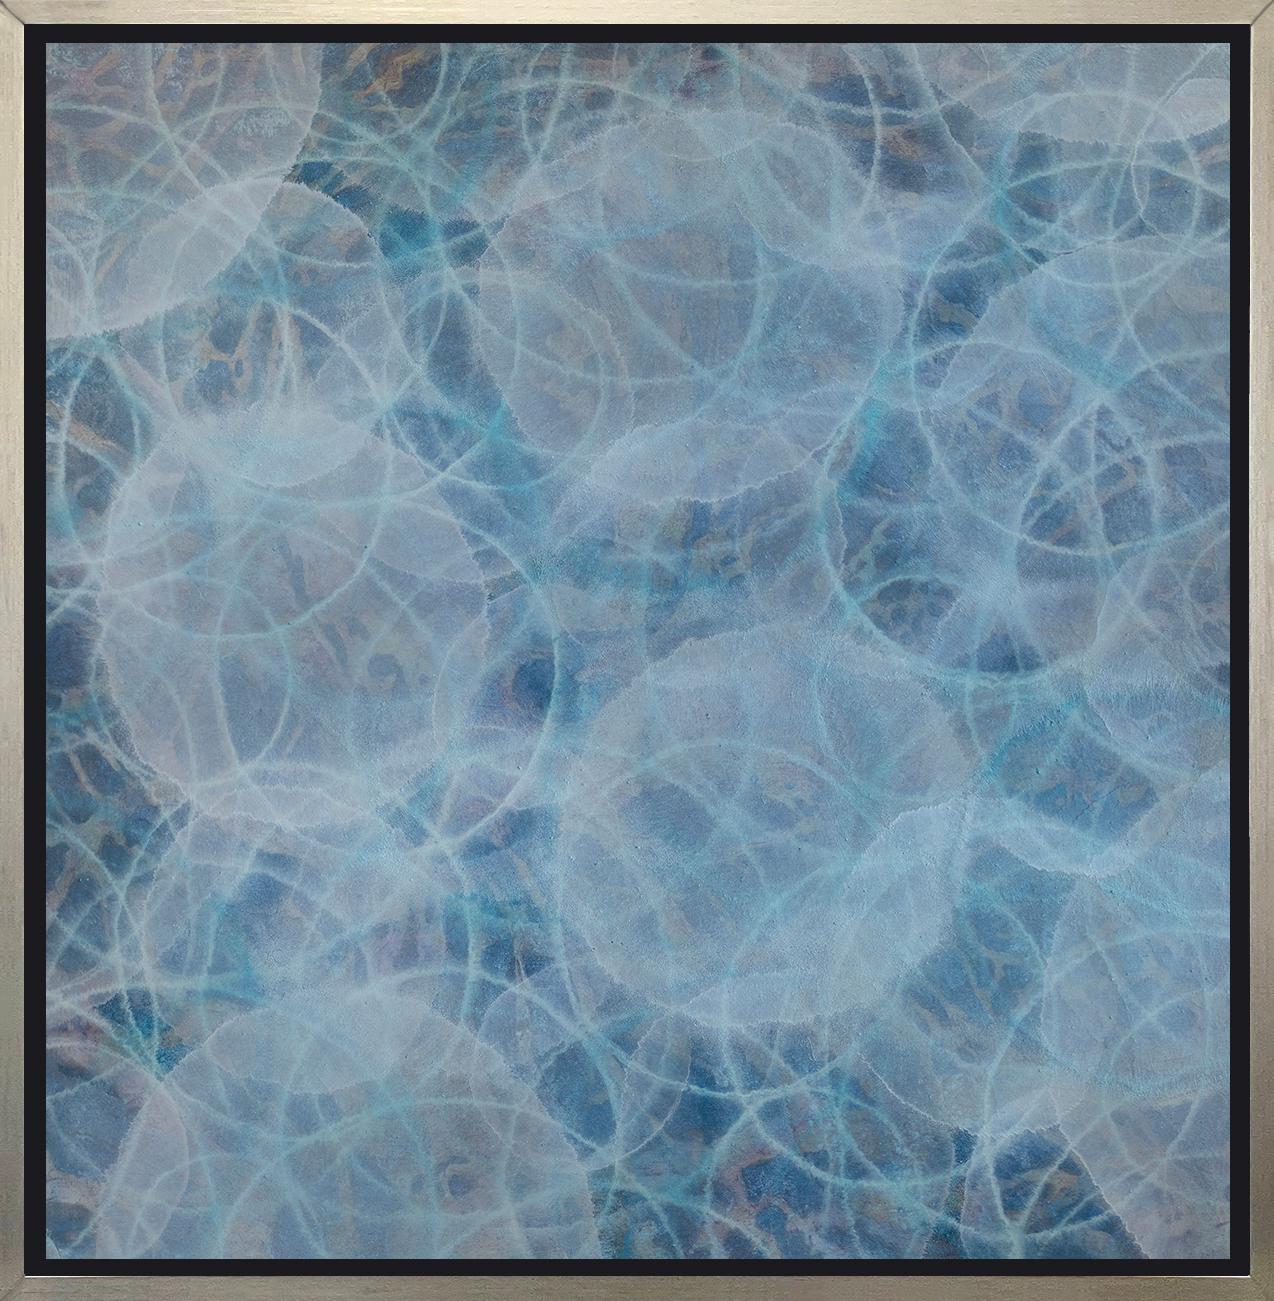 Roger Mudre Abstract Print - "Convolvulos, " Framed Limited Edition Giclee Print, 36" x 36"